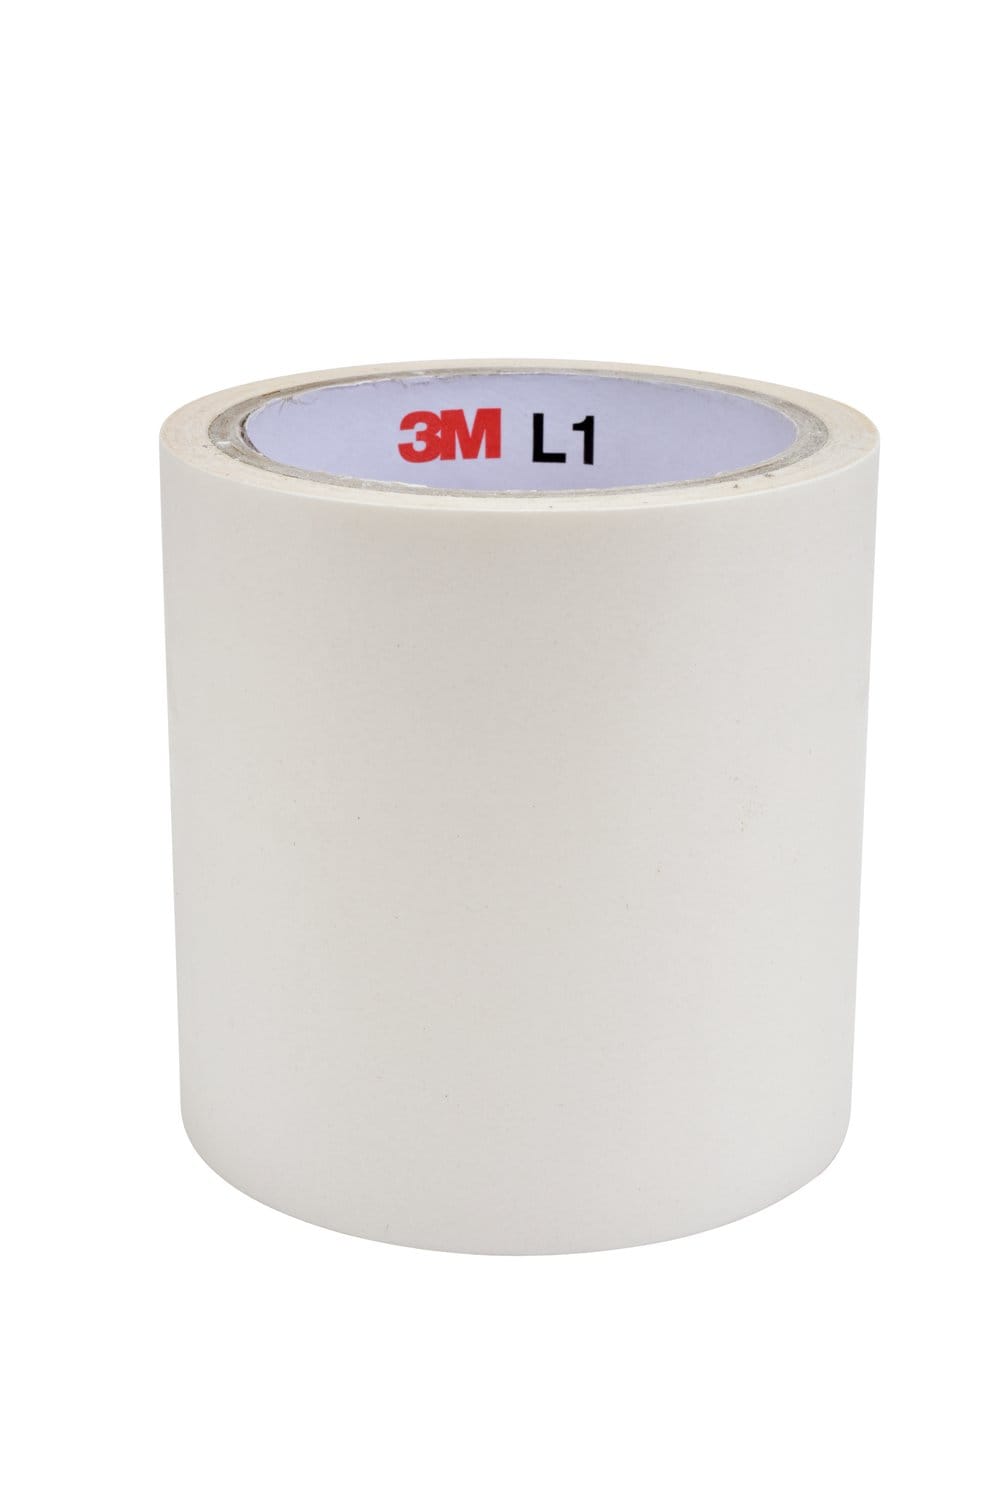 7100112348 - 3M Double Coated Adhesive Tape L1+DCP, Clear, 1372 mm x 10 m, 0.09 mm,
1 roll per case, Sample